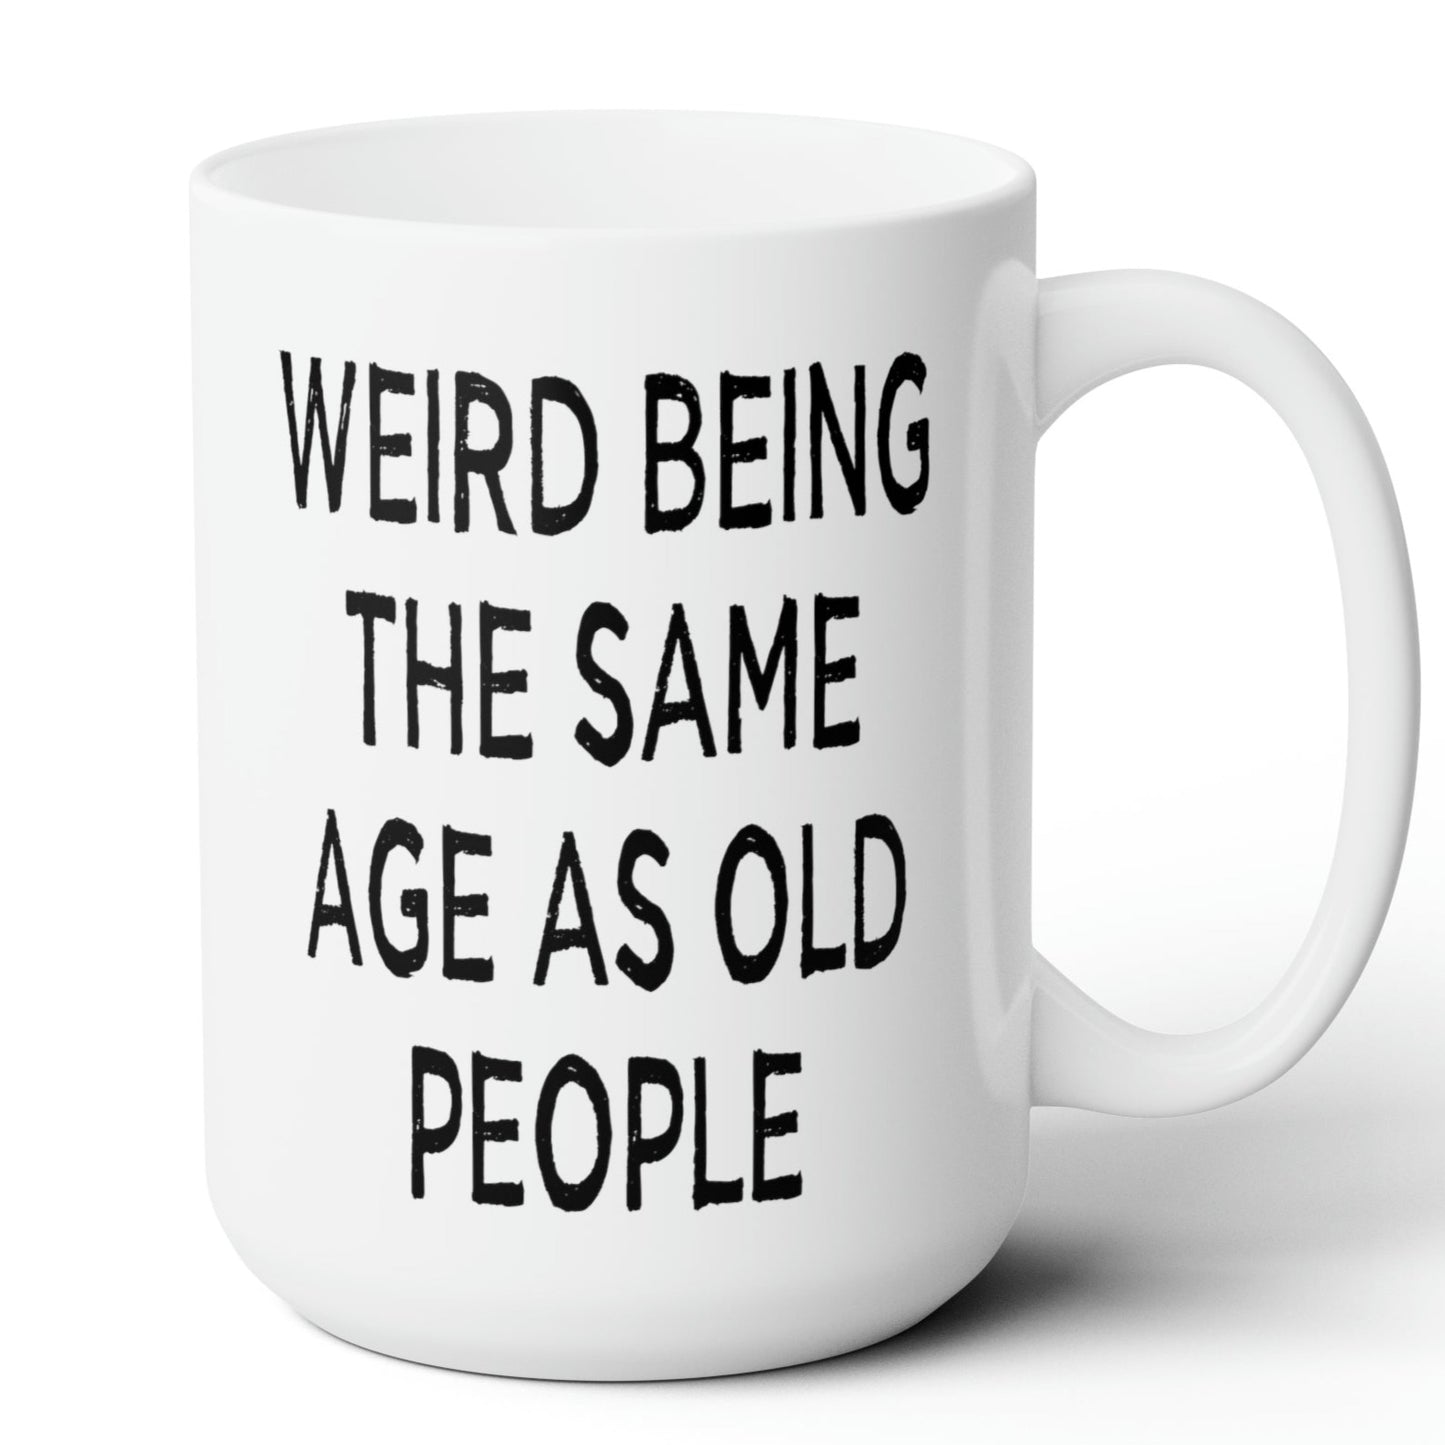 Weird Being the Same Age as Old People Mug 15oz